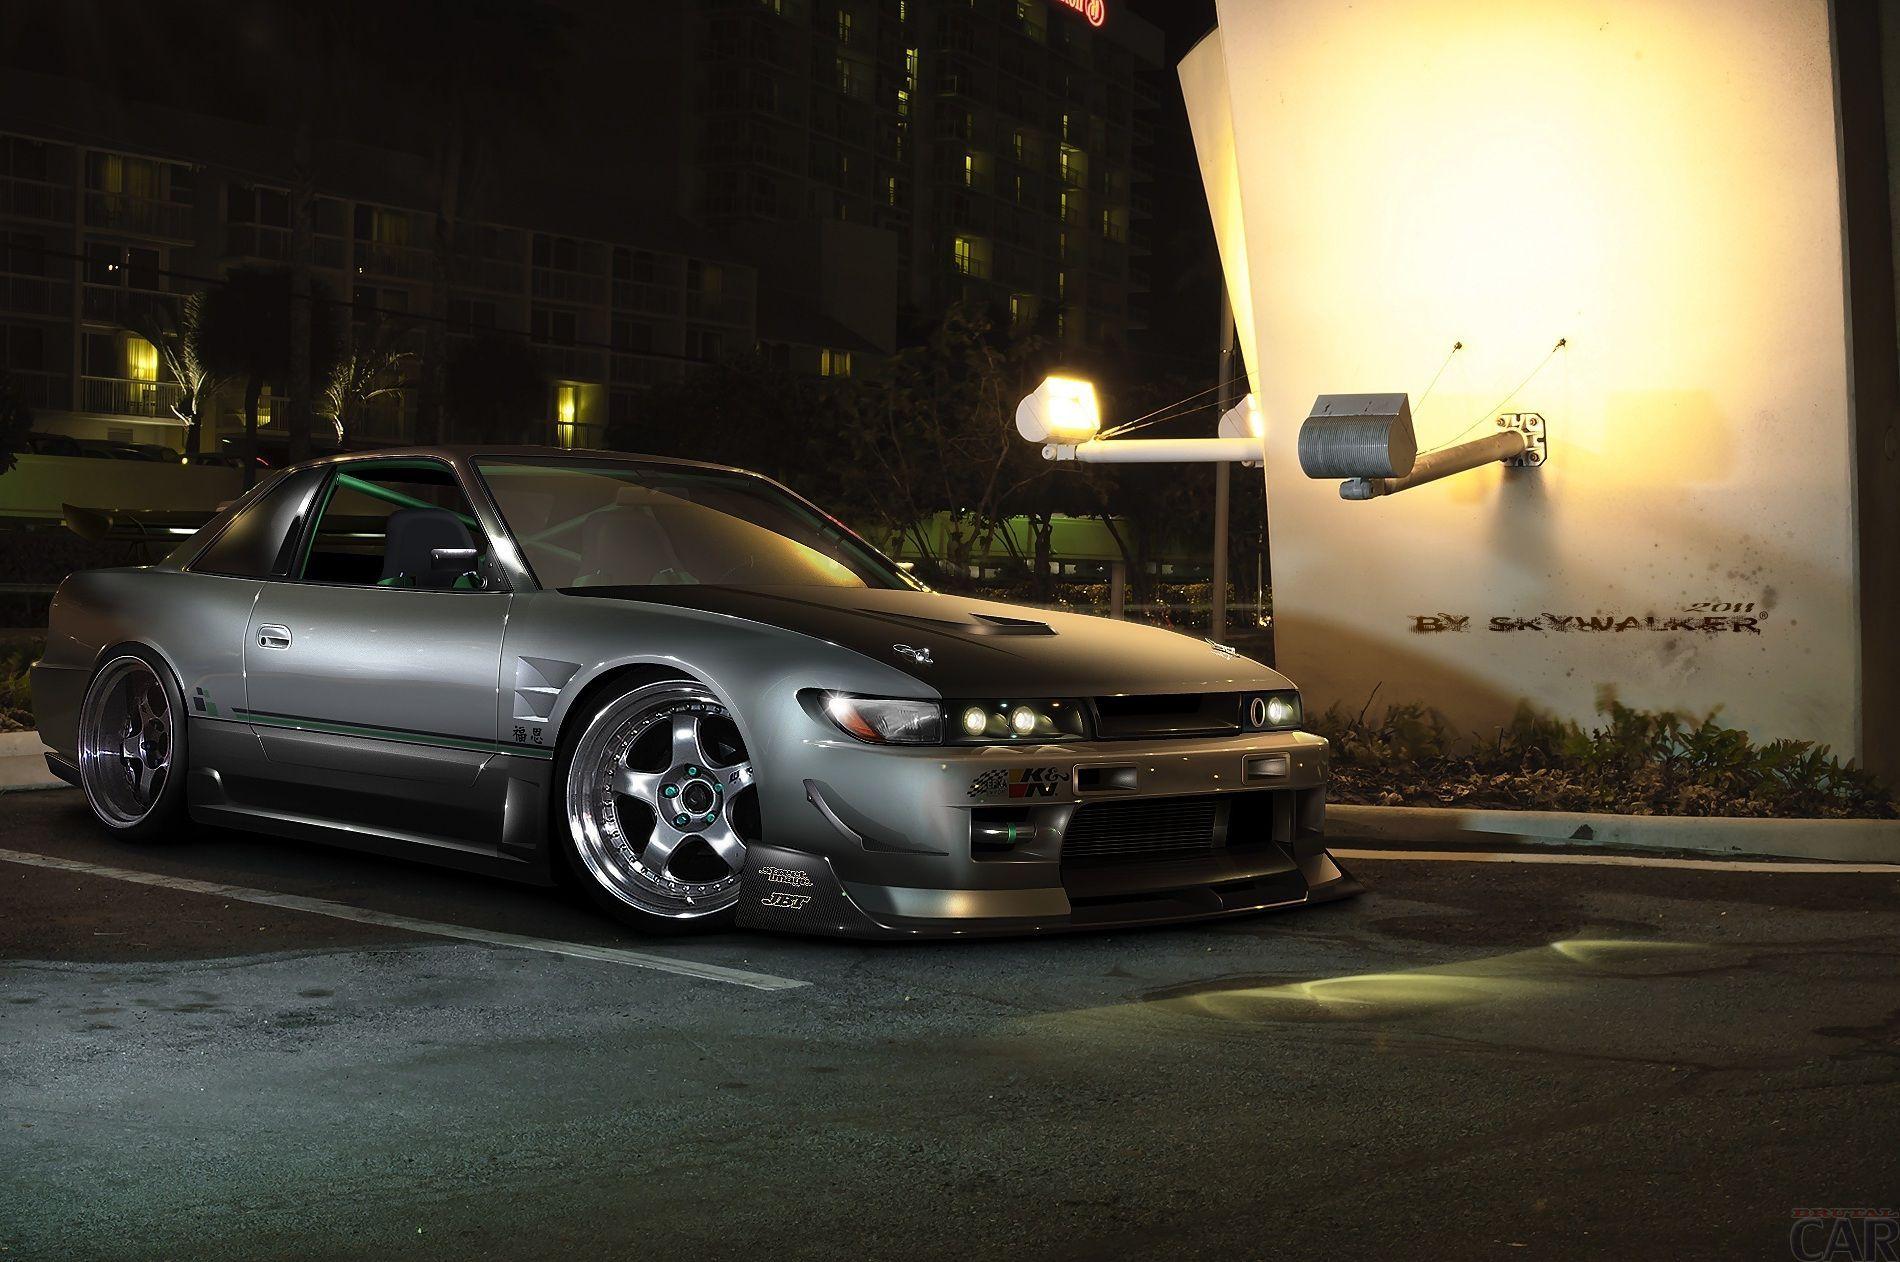 NLR – Nissan Silvia Wallpapers, Wallpapers of Nissan Silvia FHDQ